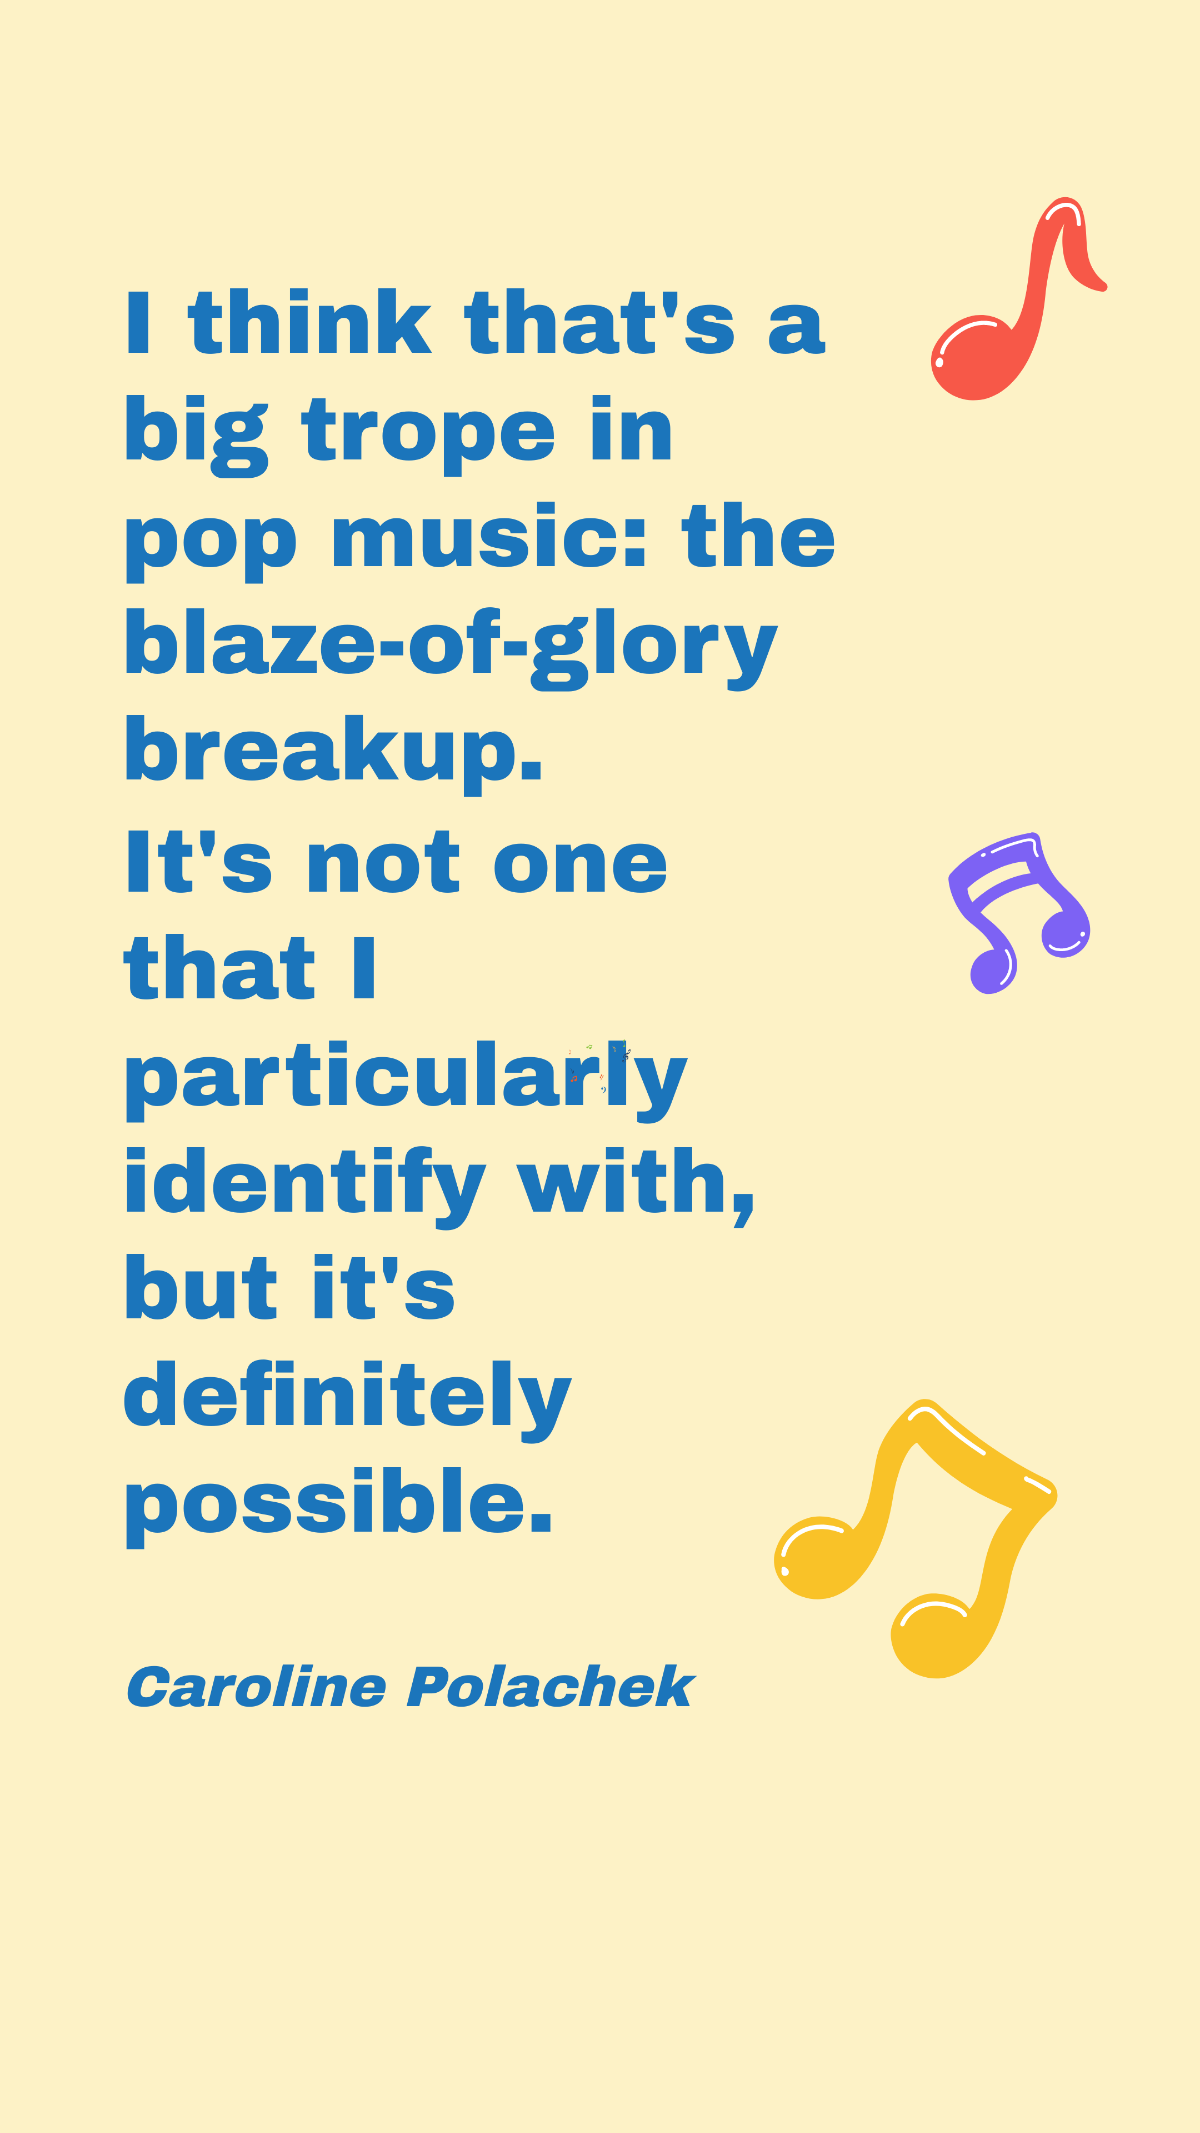 Caroline Polachek - I think that's a big trope in pop music: the blaze-of-glory breakup. It's not one that I particularly identify with, but it's definitely possible. Template